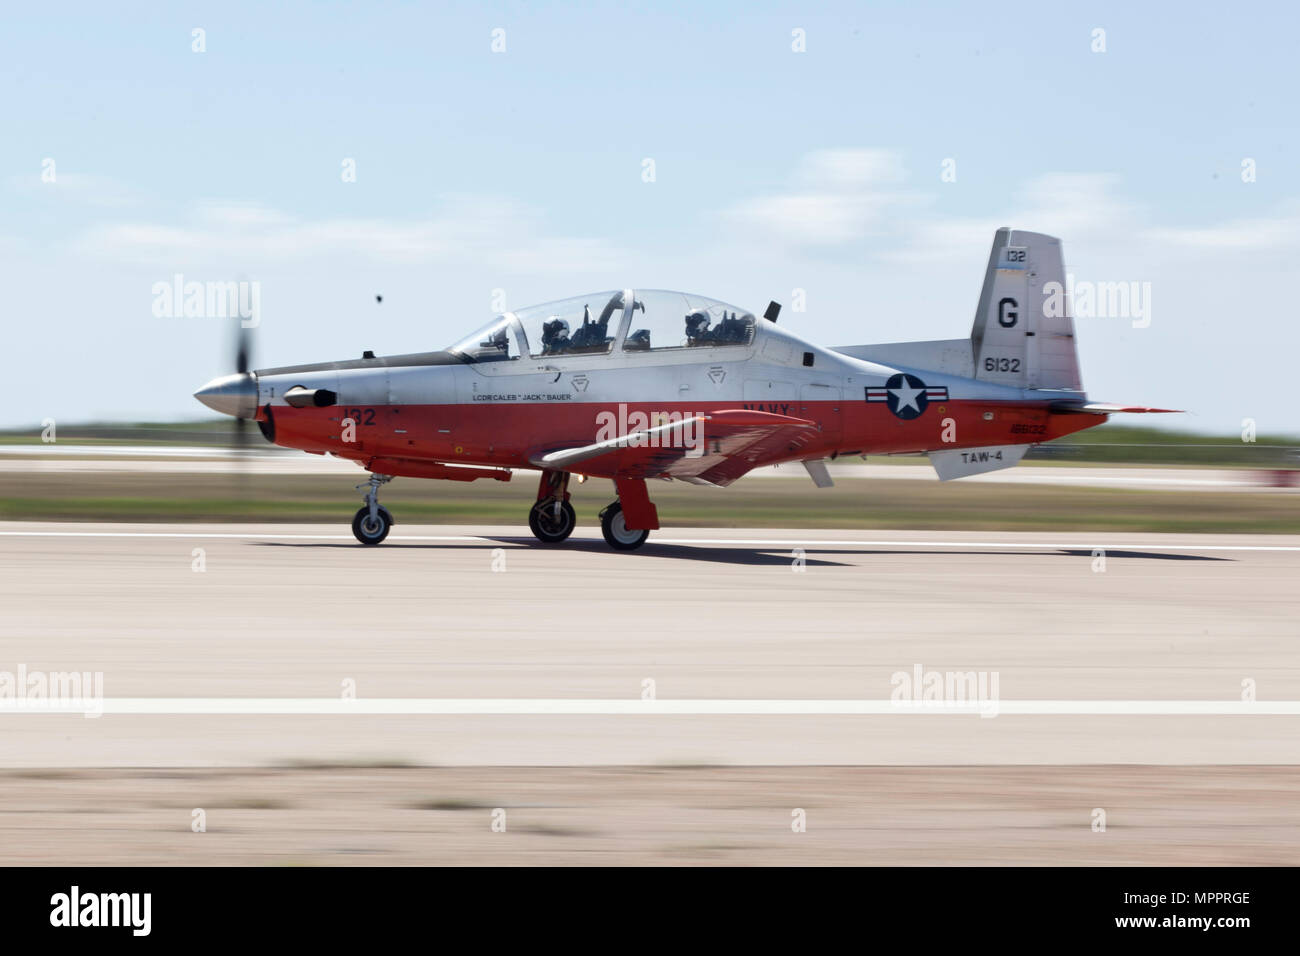 U.S. Marine Corps officers assigned to the Basic Flight Training Course, Training Air Wing Four, land a T-6B training aircraft at Naval Air Station Corpus Christi, Texas, March 20, 2017. The mission of Training Air Wing Four is to provide basic flight training as well as intermediate and advanced flight training using multi-engine aircraft. (U.S. Marine Corps photo by Lance Cpl. Jose Villalobosrocha) Stock Photo